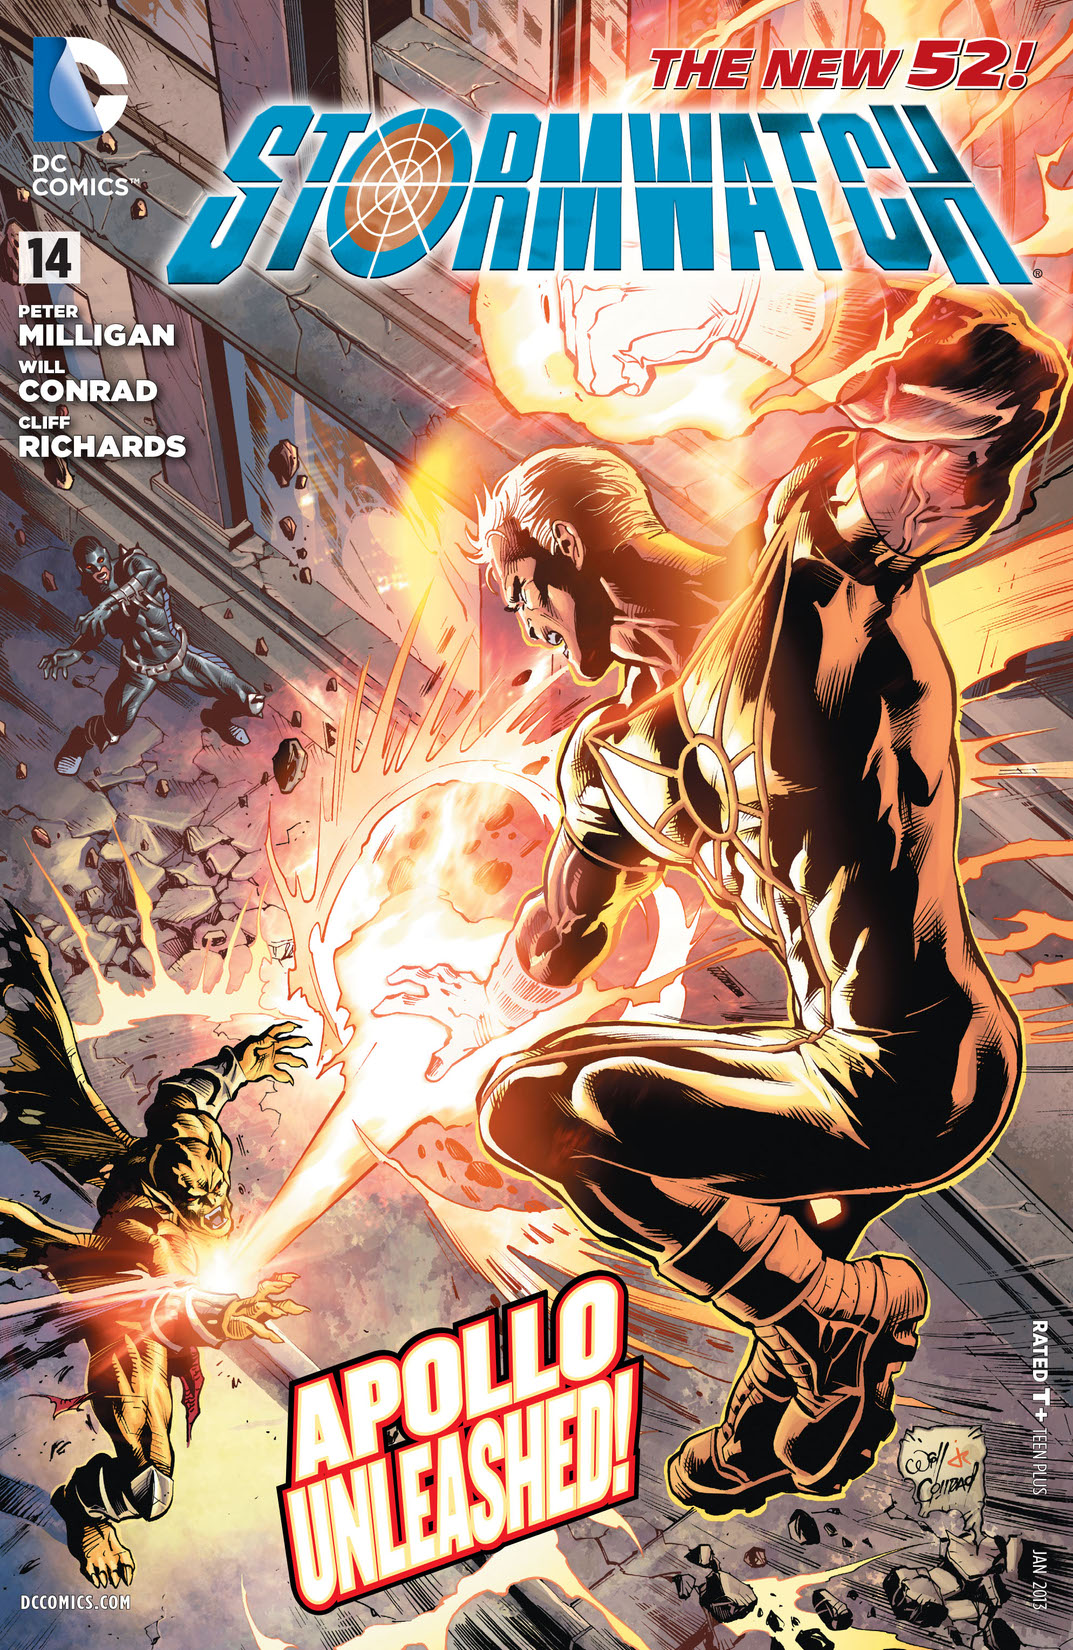 Stormwatch (2011-) #14 preview images